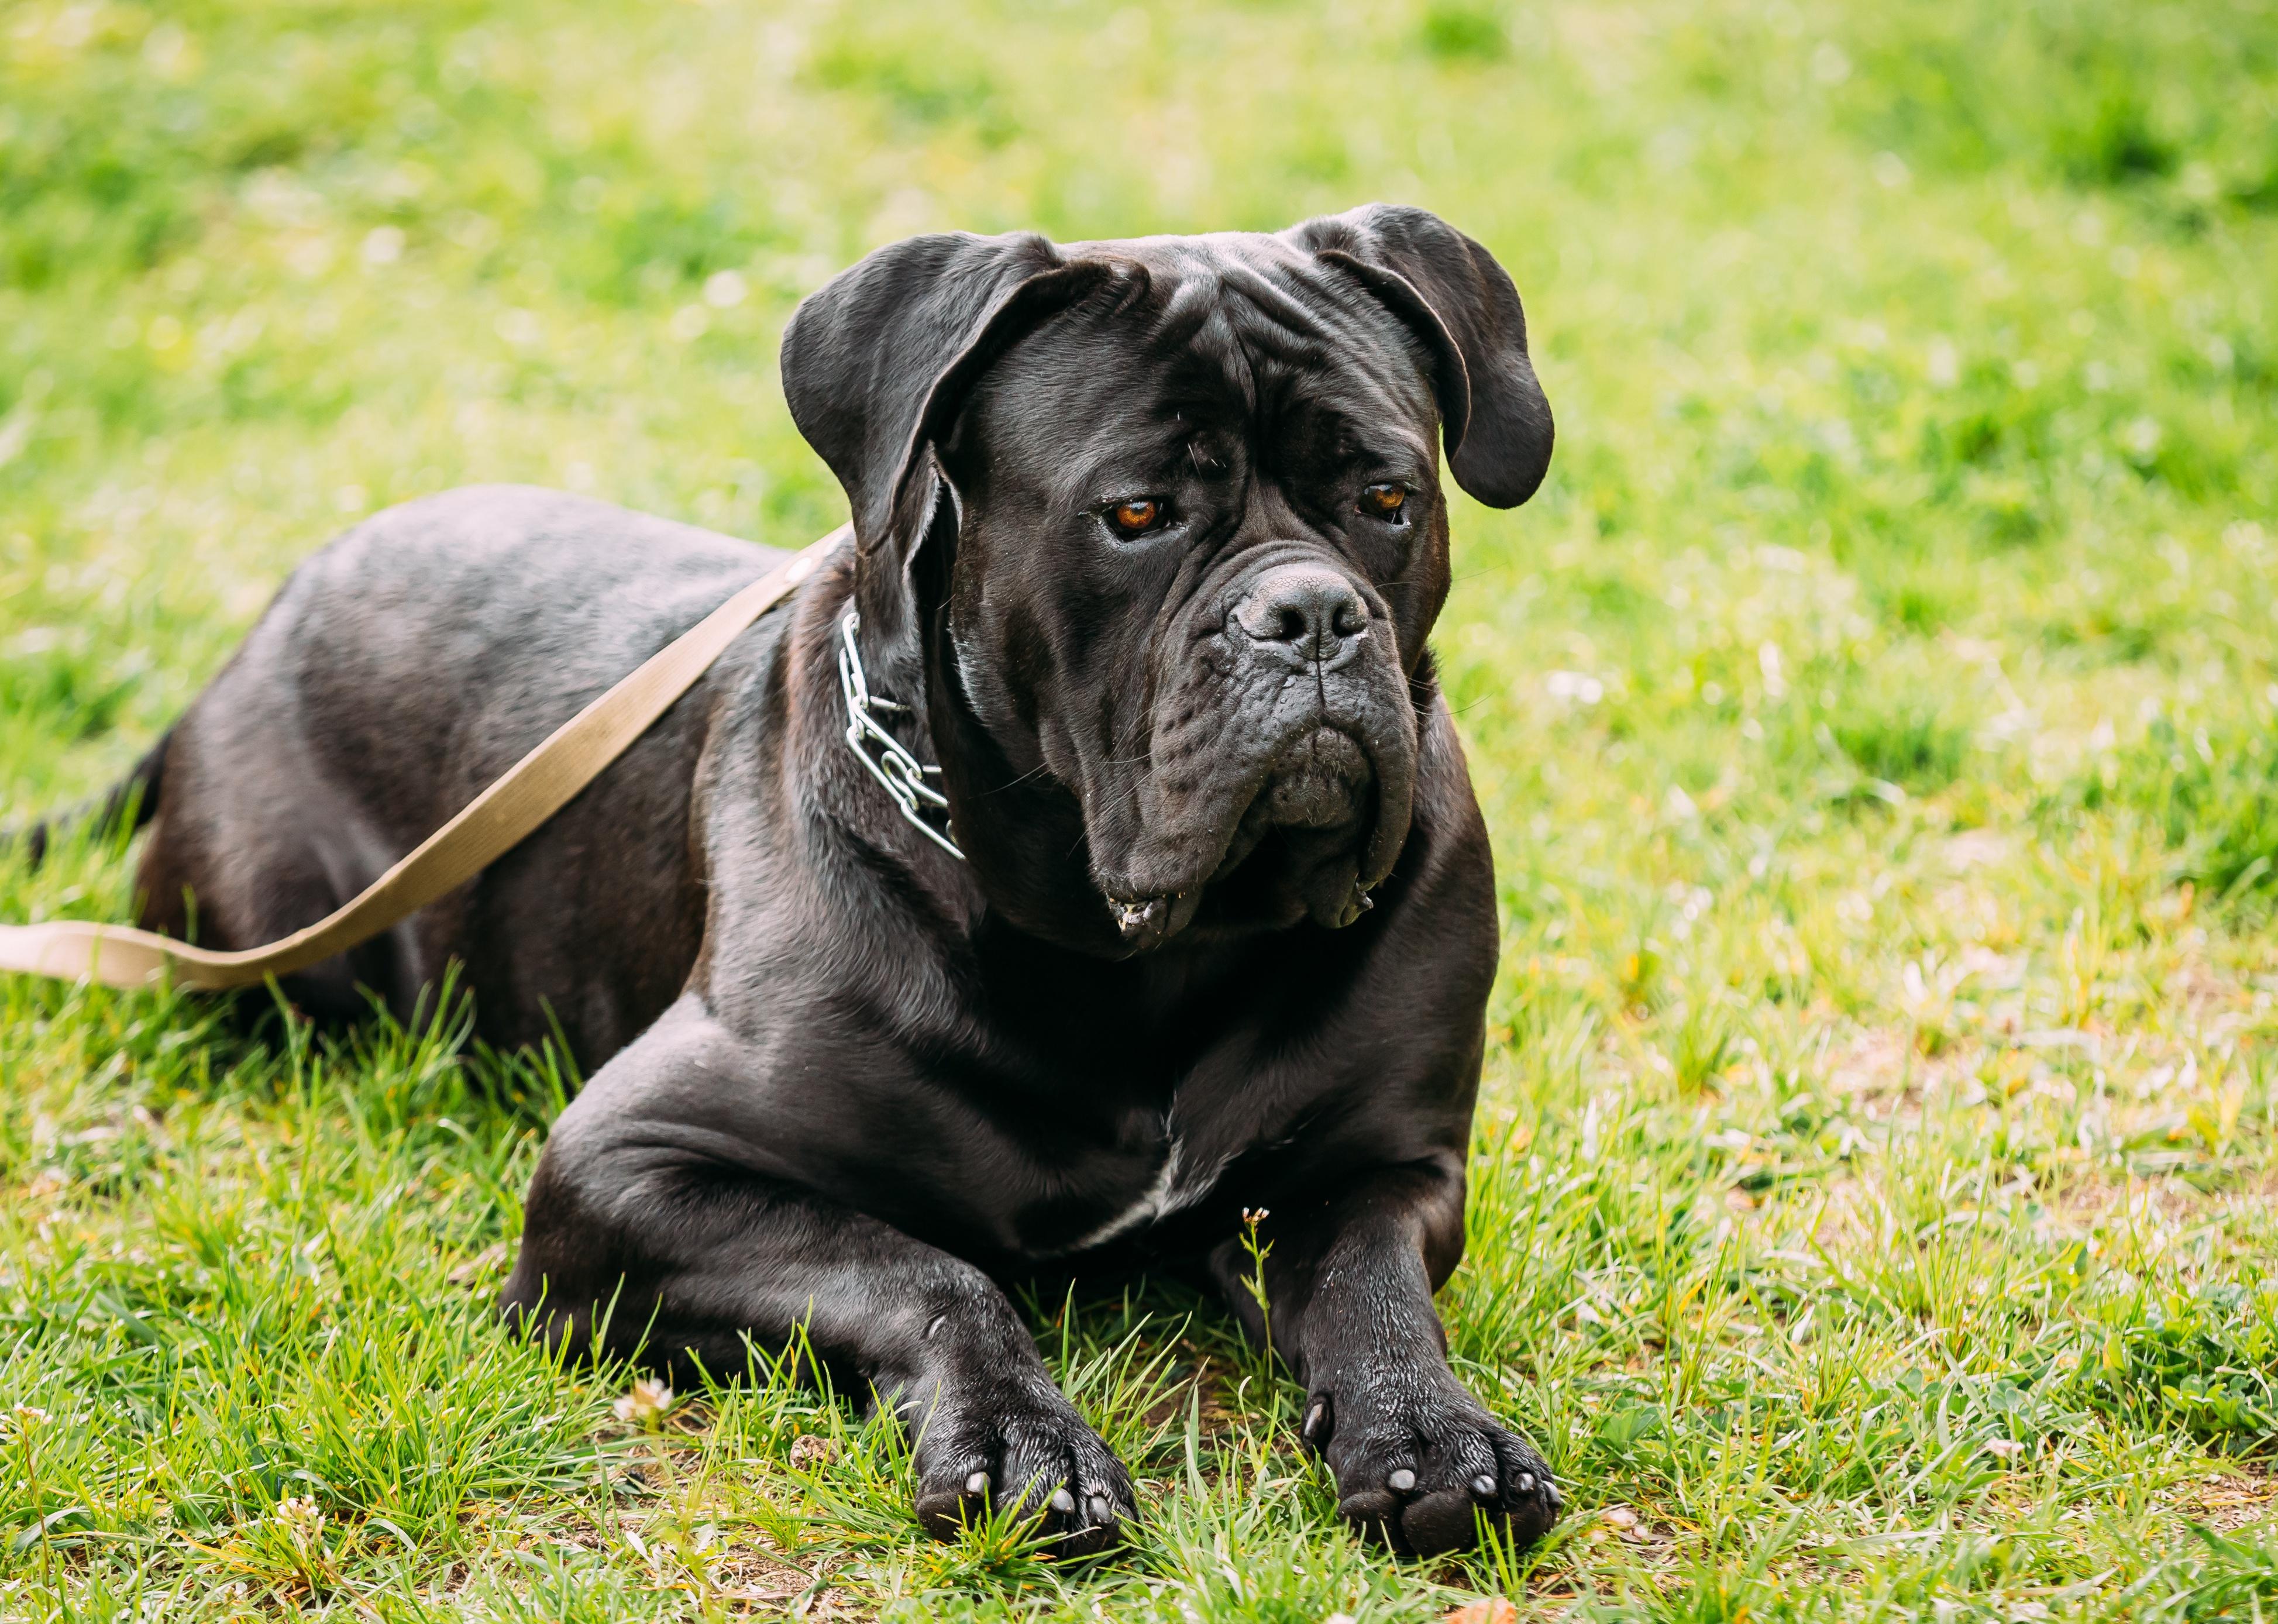 Black young Cane Corso dog laying down on grass. 